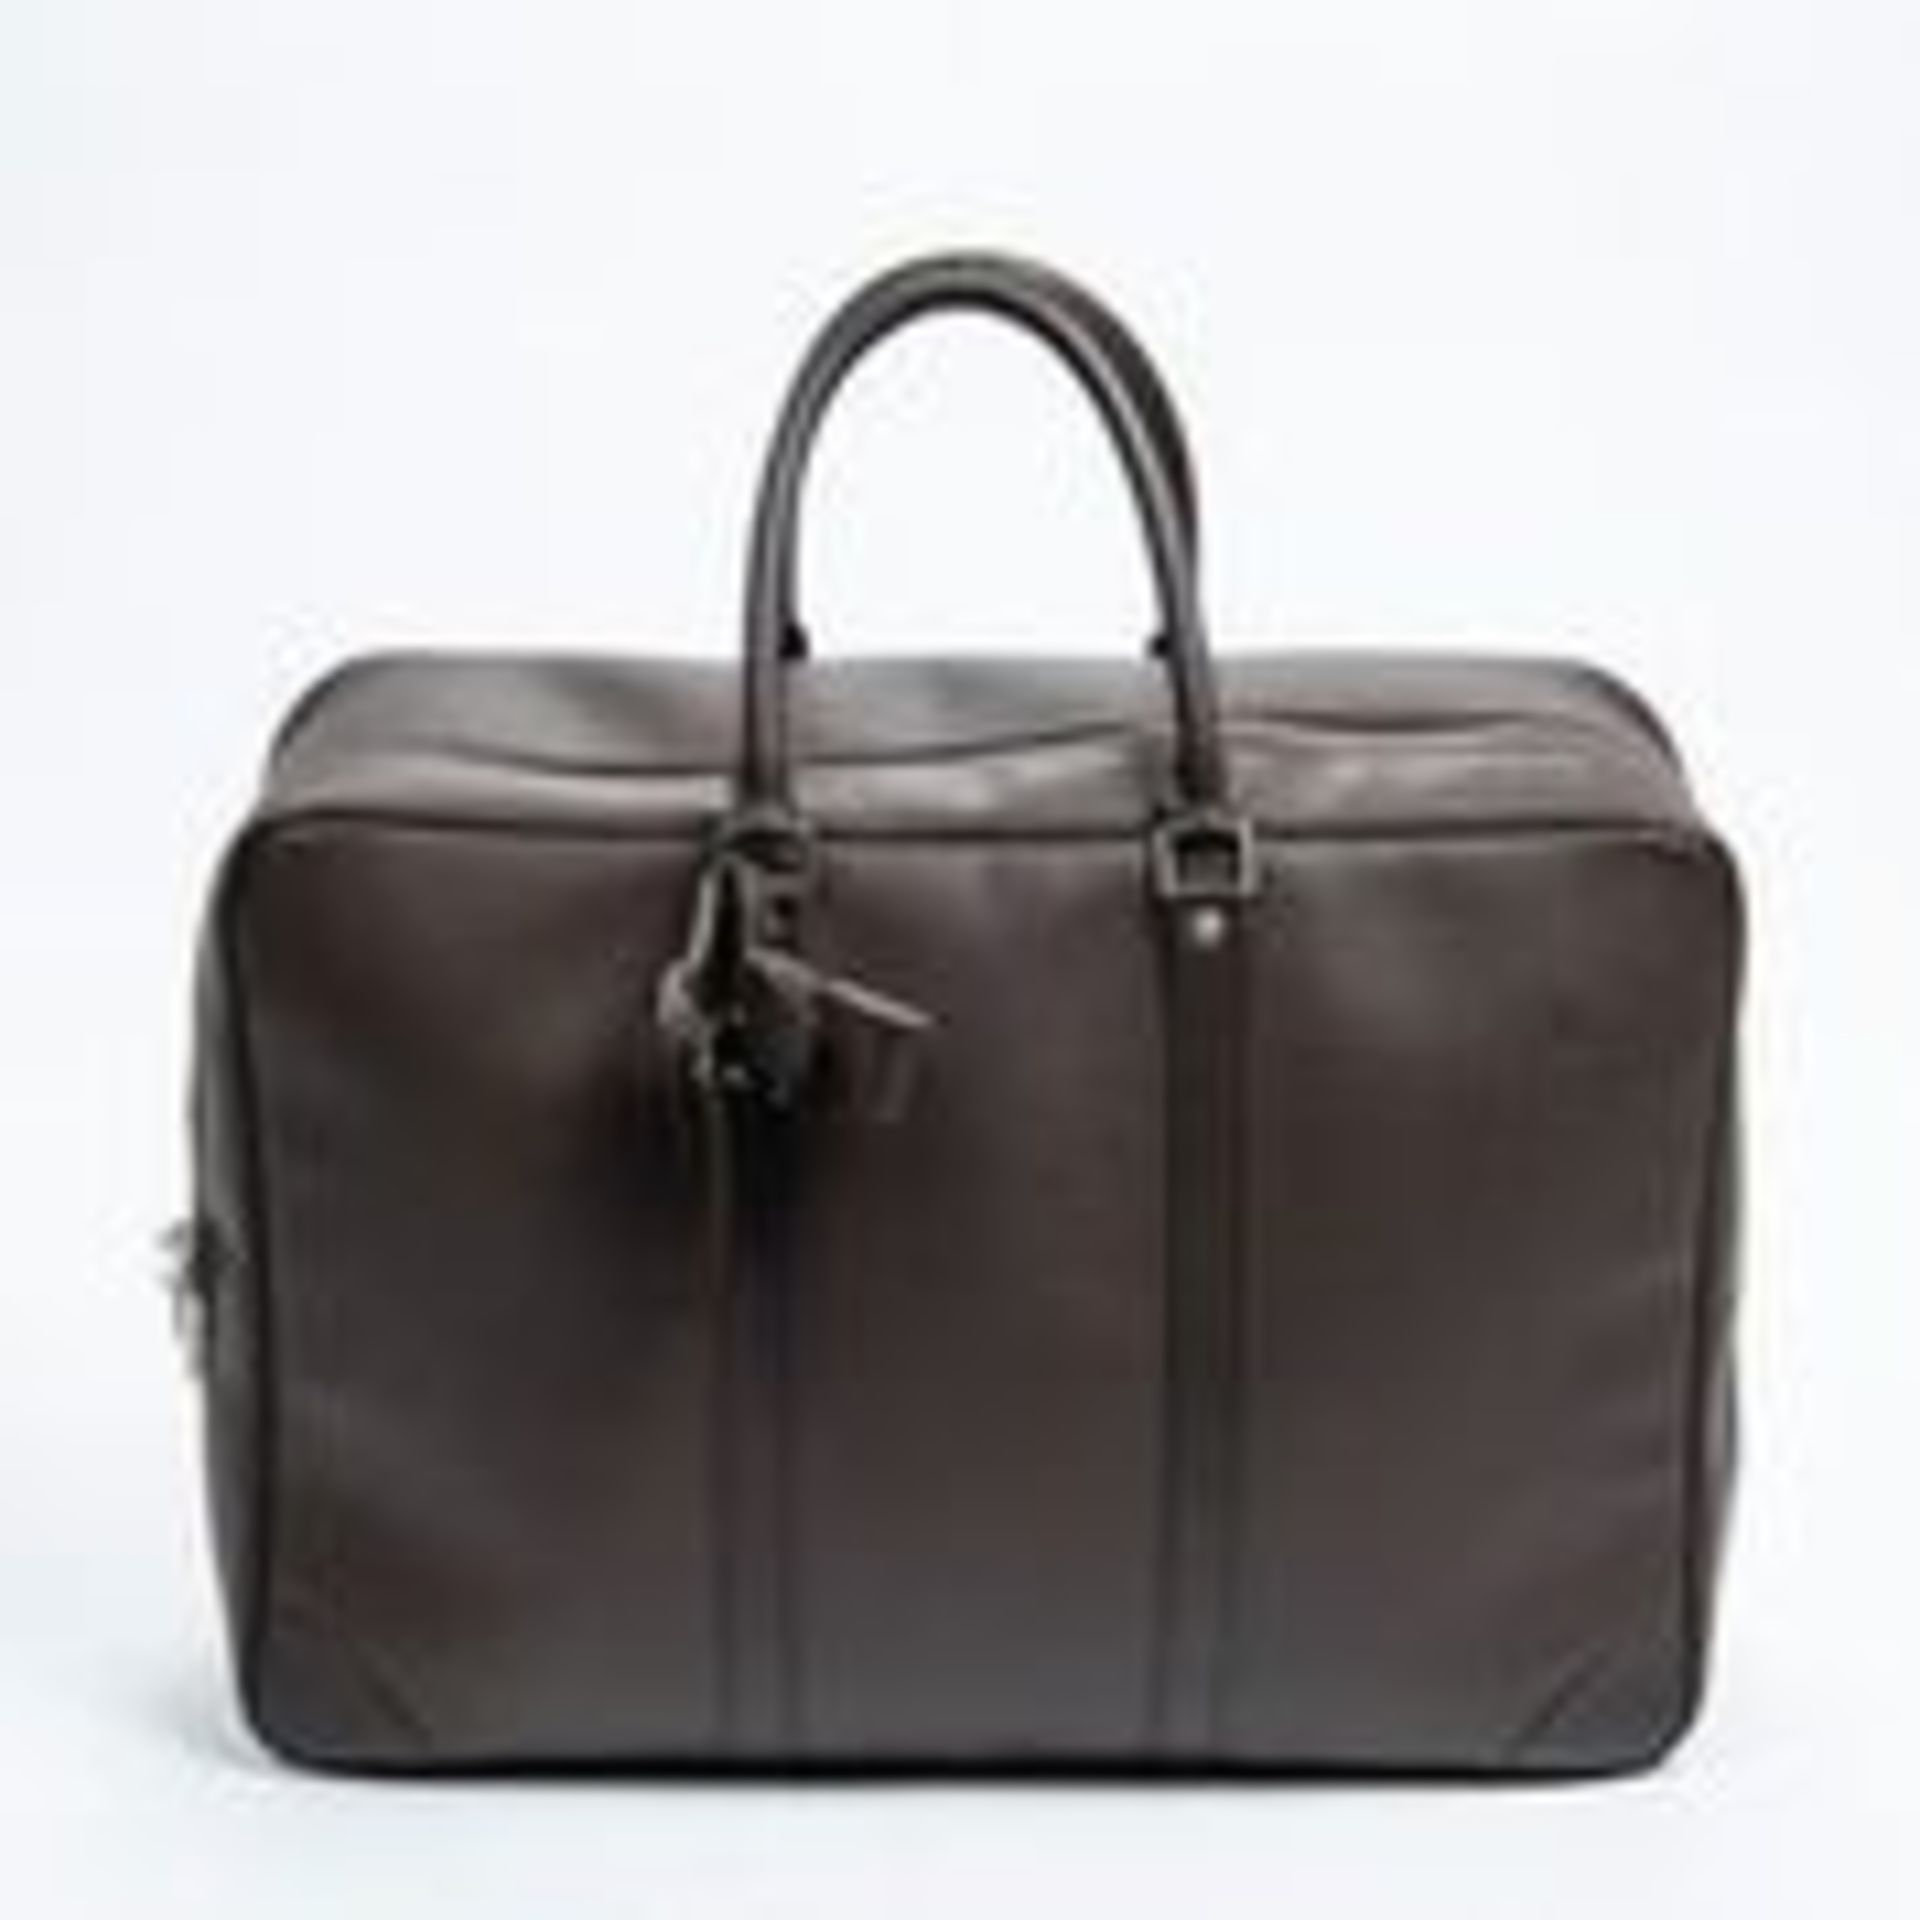 RRP £1,850 Louis Vuitton Sirius Travel Bag Brown - AAR5019 - Grade AB - Please Contact Us Directly